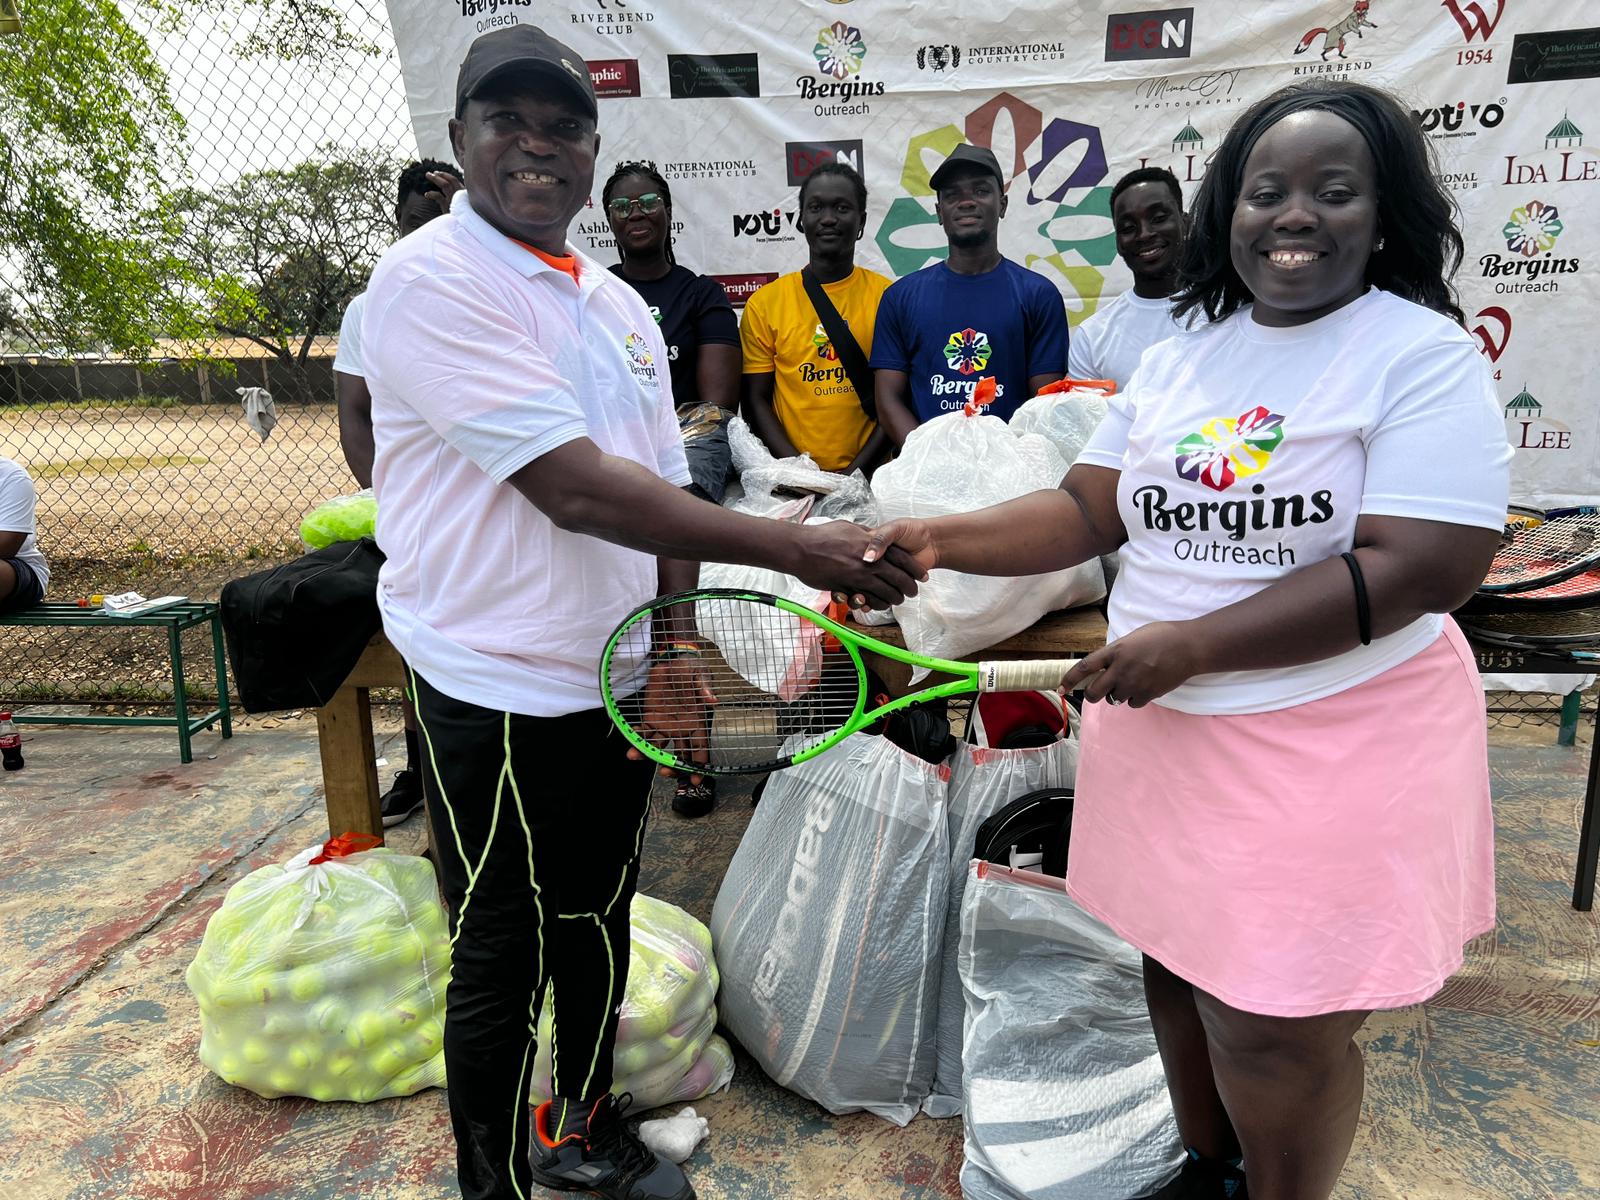 Bergins Outreach Boosts Tennis Clubs in Ghana with Pickleball Equipment